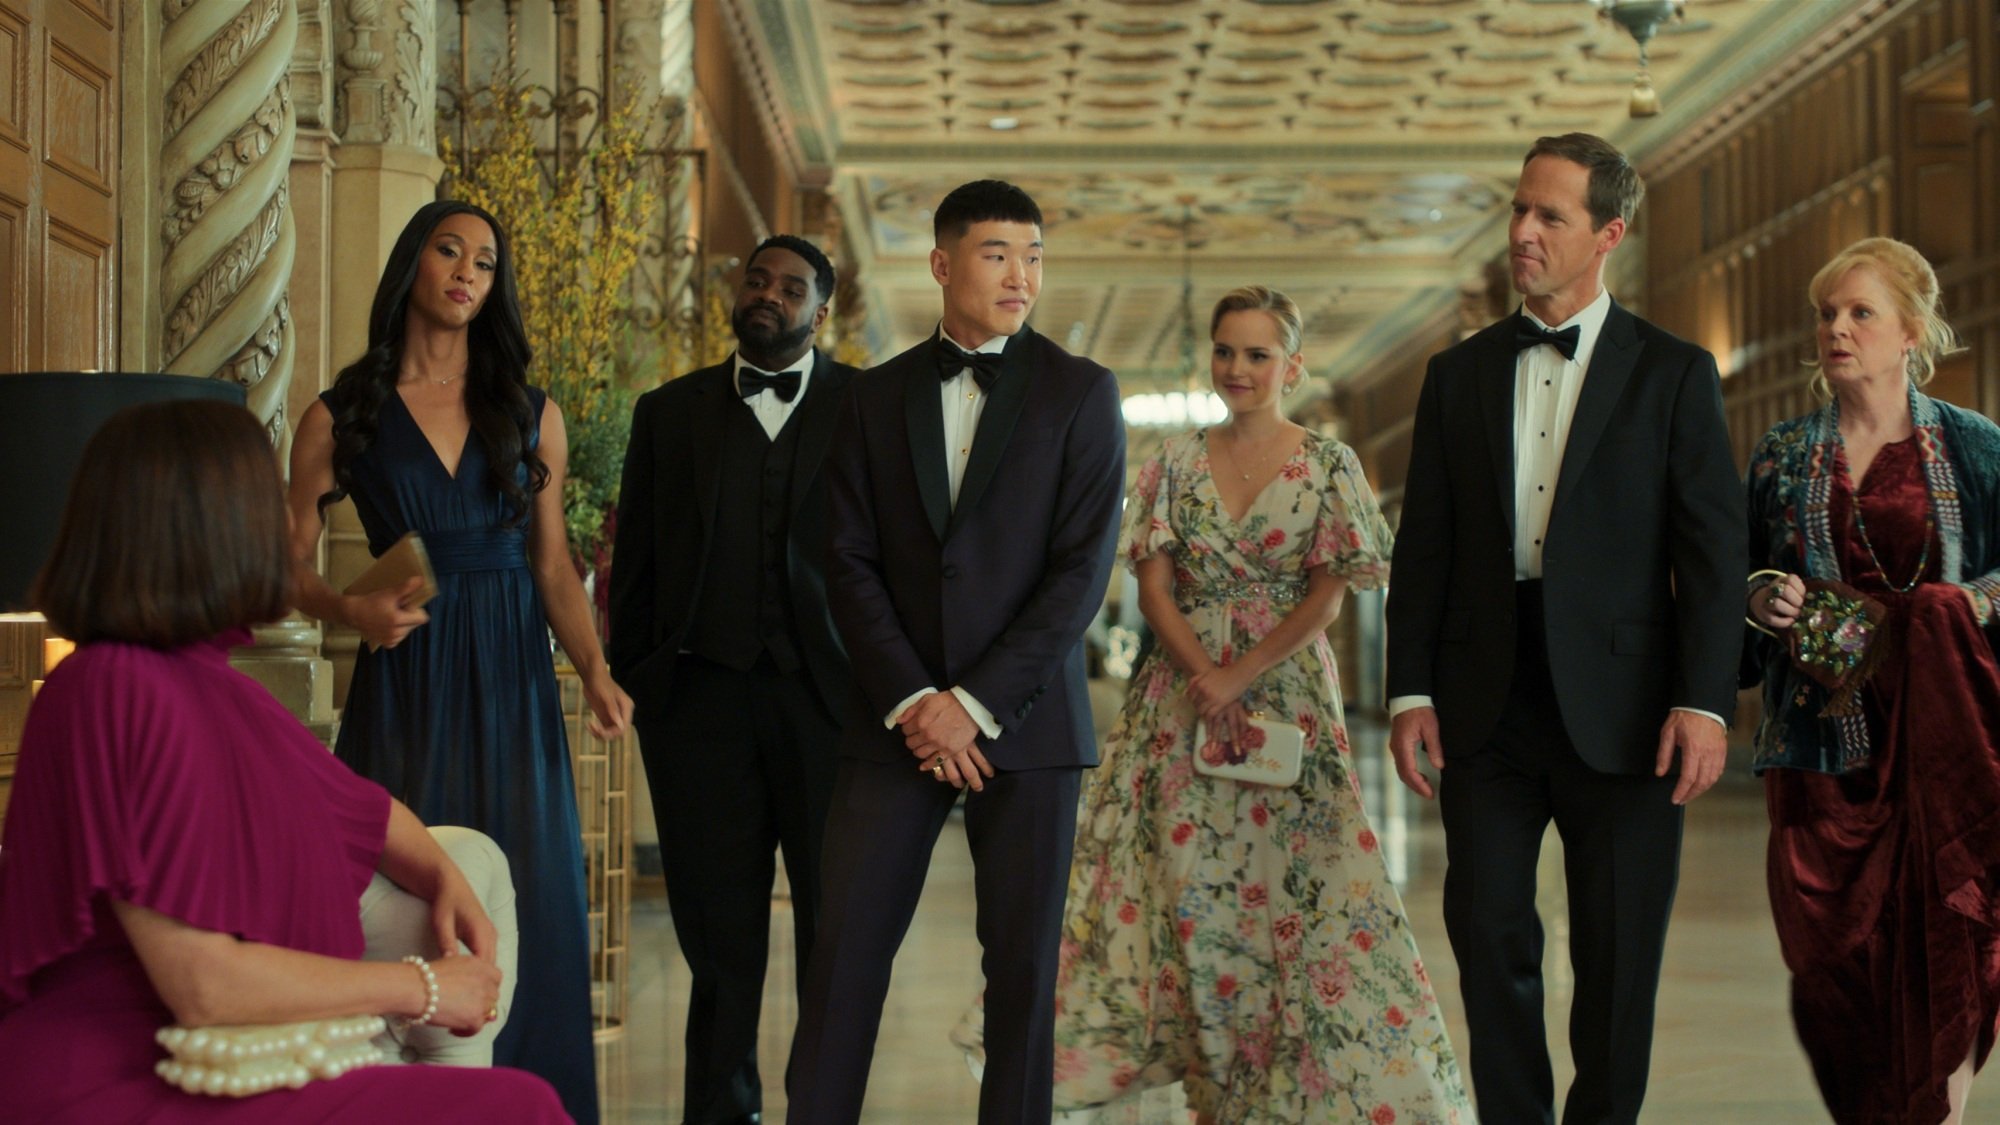 A group of people in fancy dresses and suits in a fancy hallway.